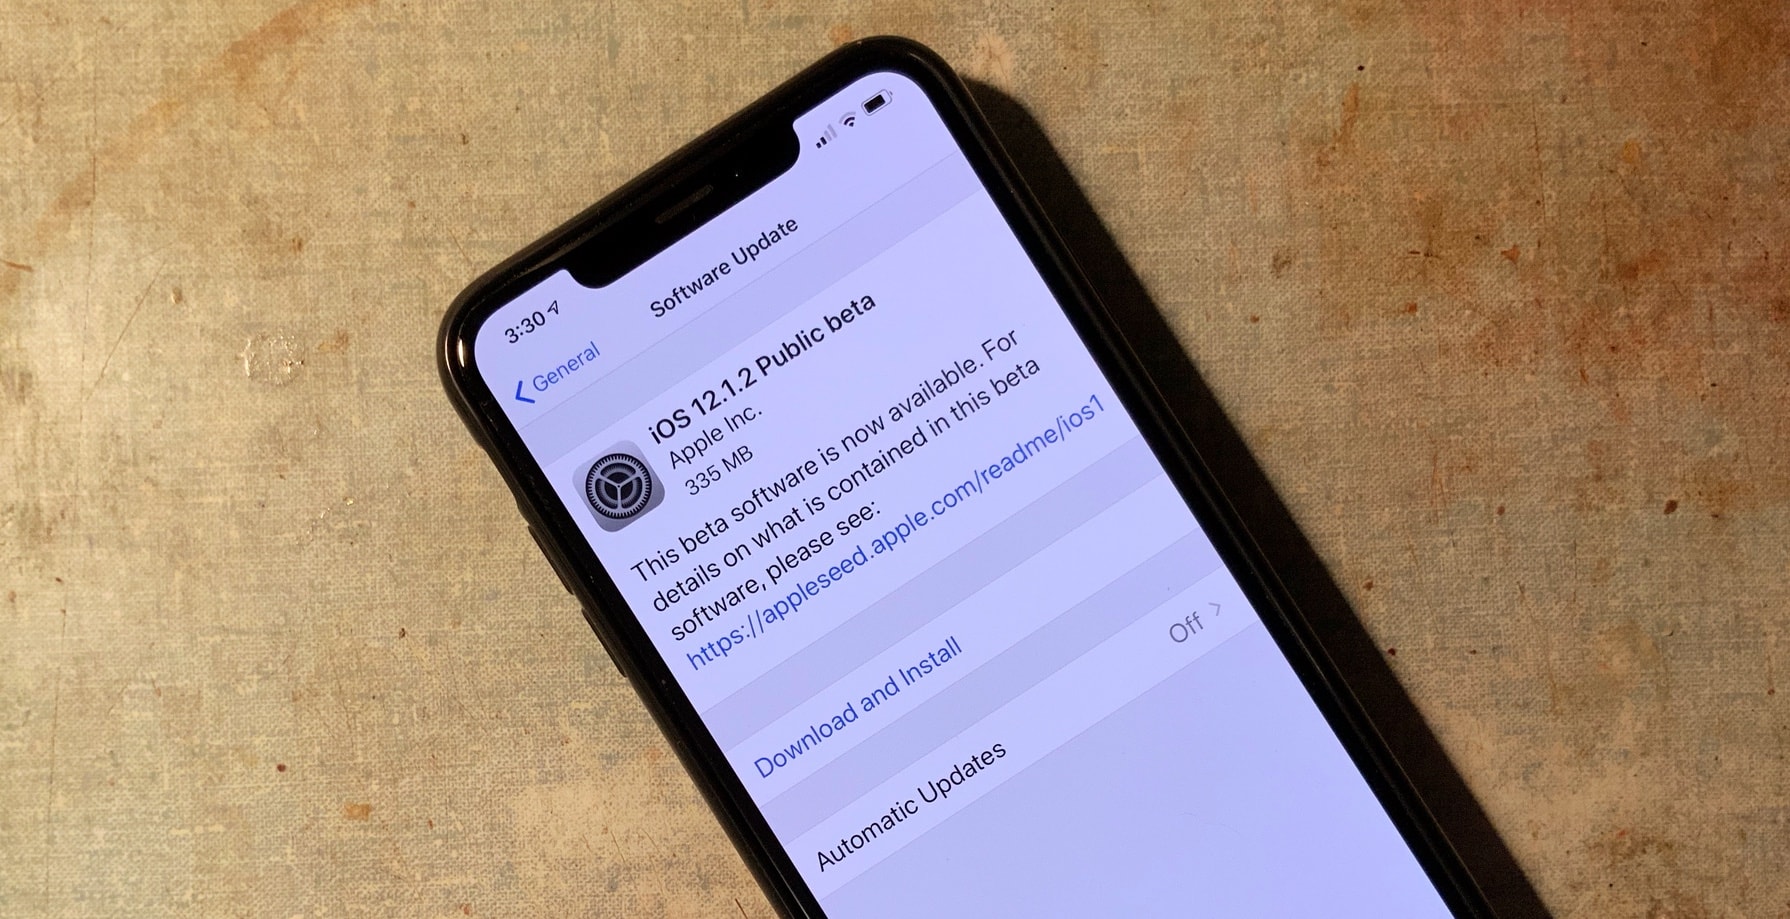 iOS 12.1.2 public beta 1 can be installed on your iPhone now.